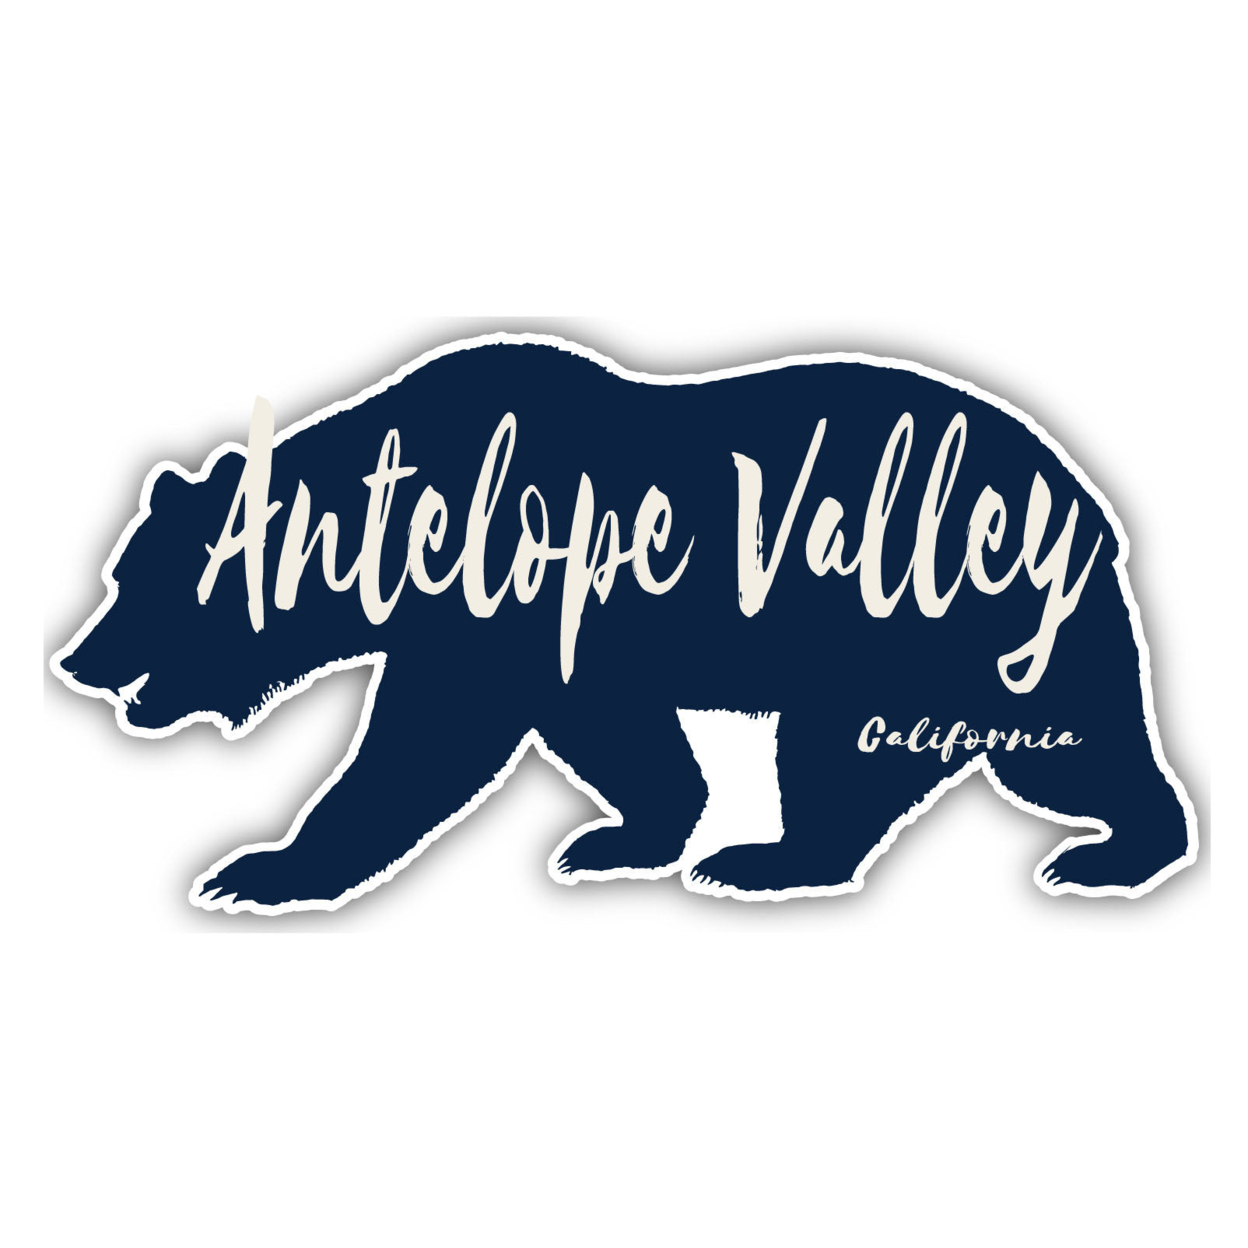 Antelope Valley California Souvenir Decorative Stickers (Choose Theme And Size) - Single Unit, 6-Inch, Camp Life